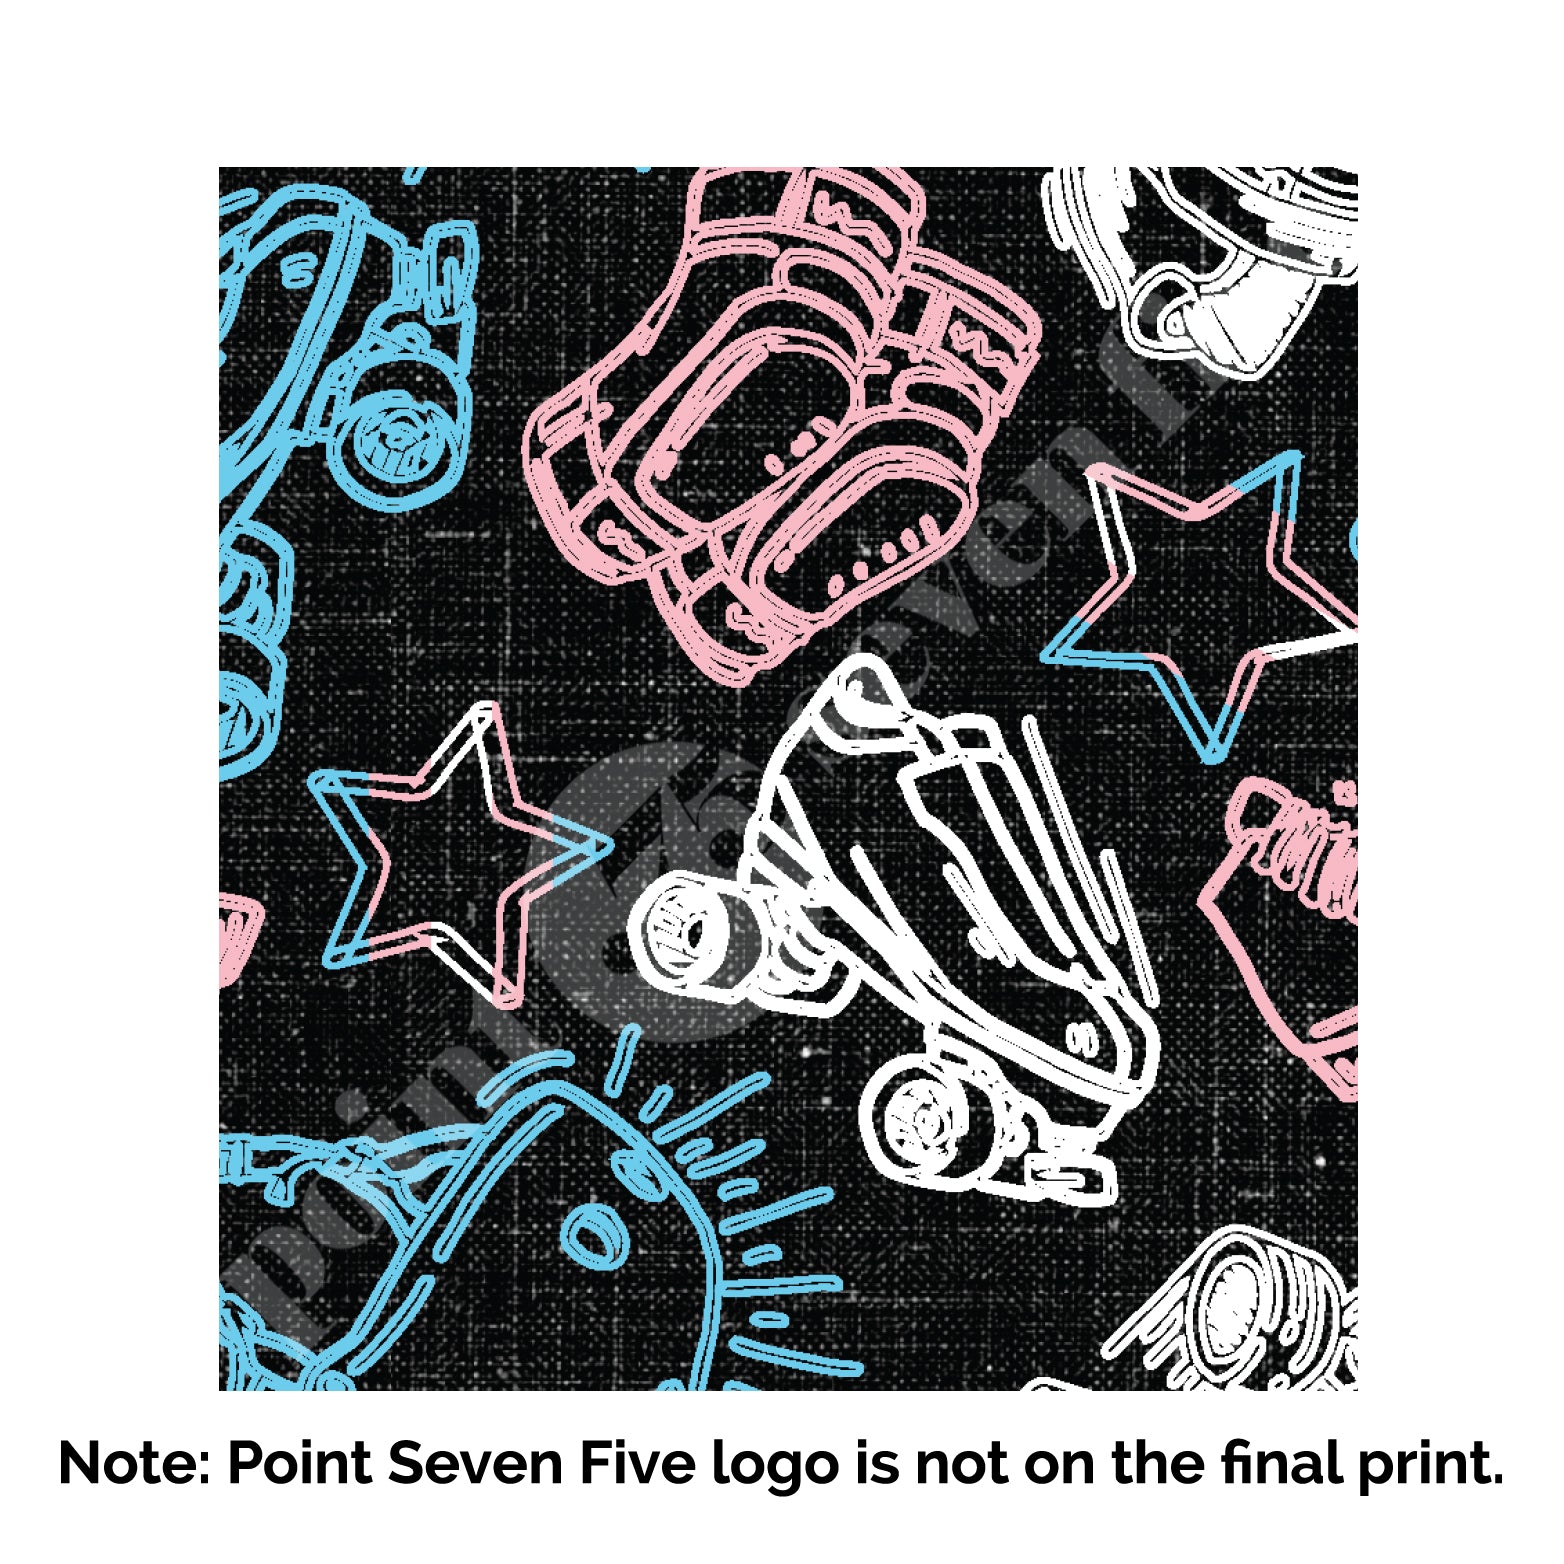 A closeup of the Pride Skate print, caption at the bottom reads "Note: Point Seven Five logo is not onthe final print." The print has rollerskates, helmets, stars & knee pads. The graphics are in the colours of the Trans Pride Flag pink, white and light blue.